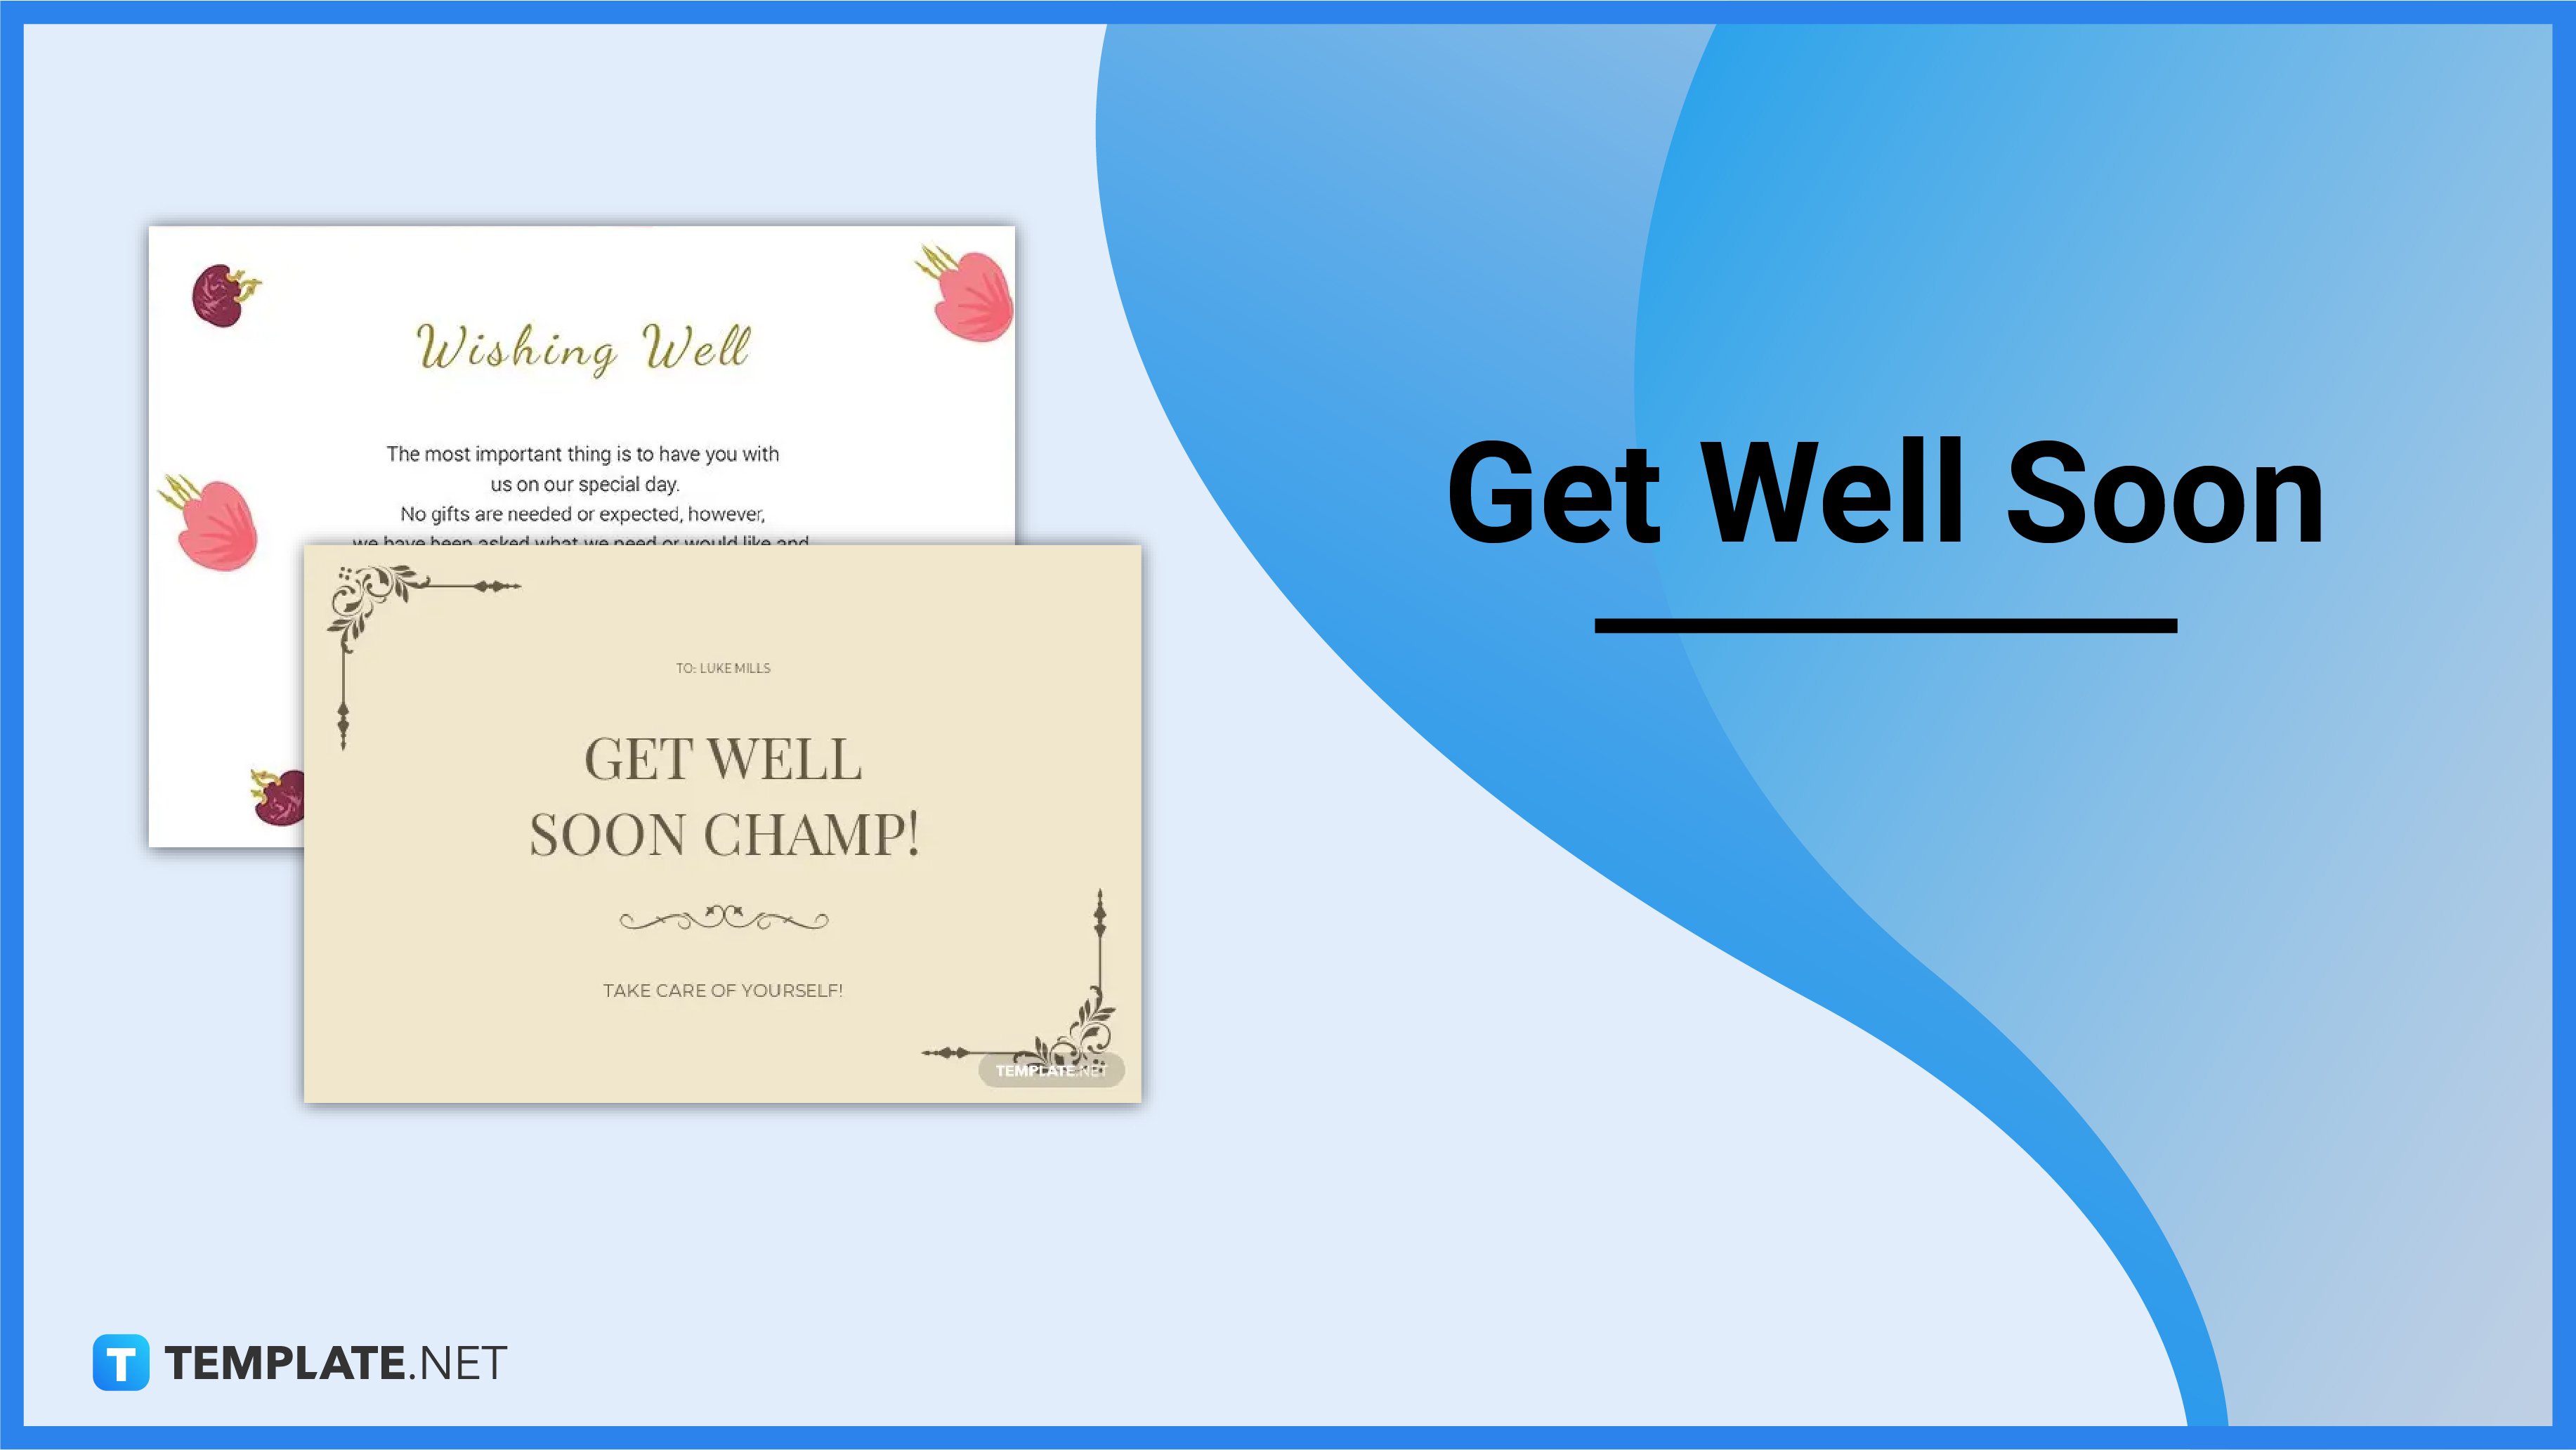 Free Vector  Get well soon with bear and flower